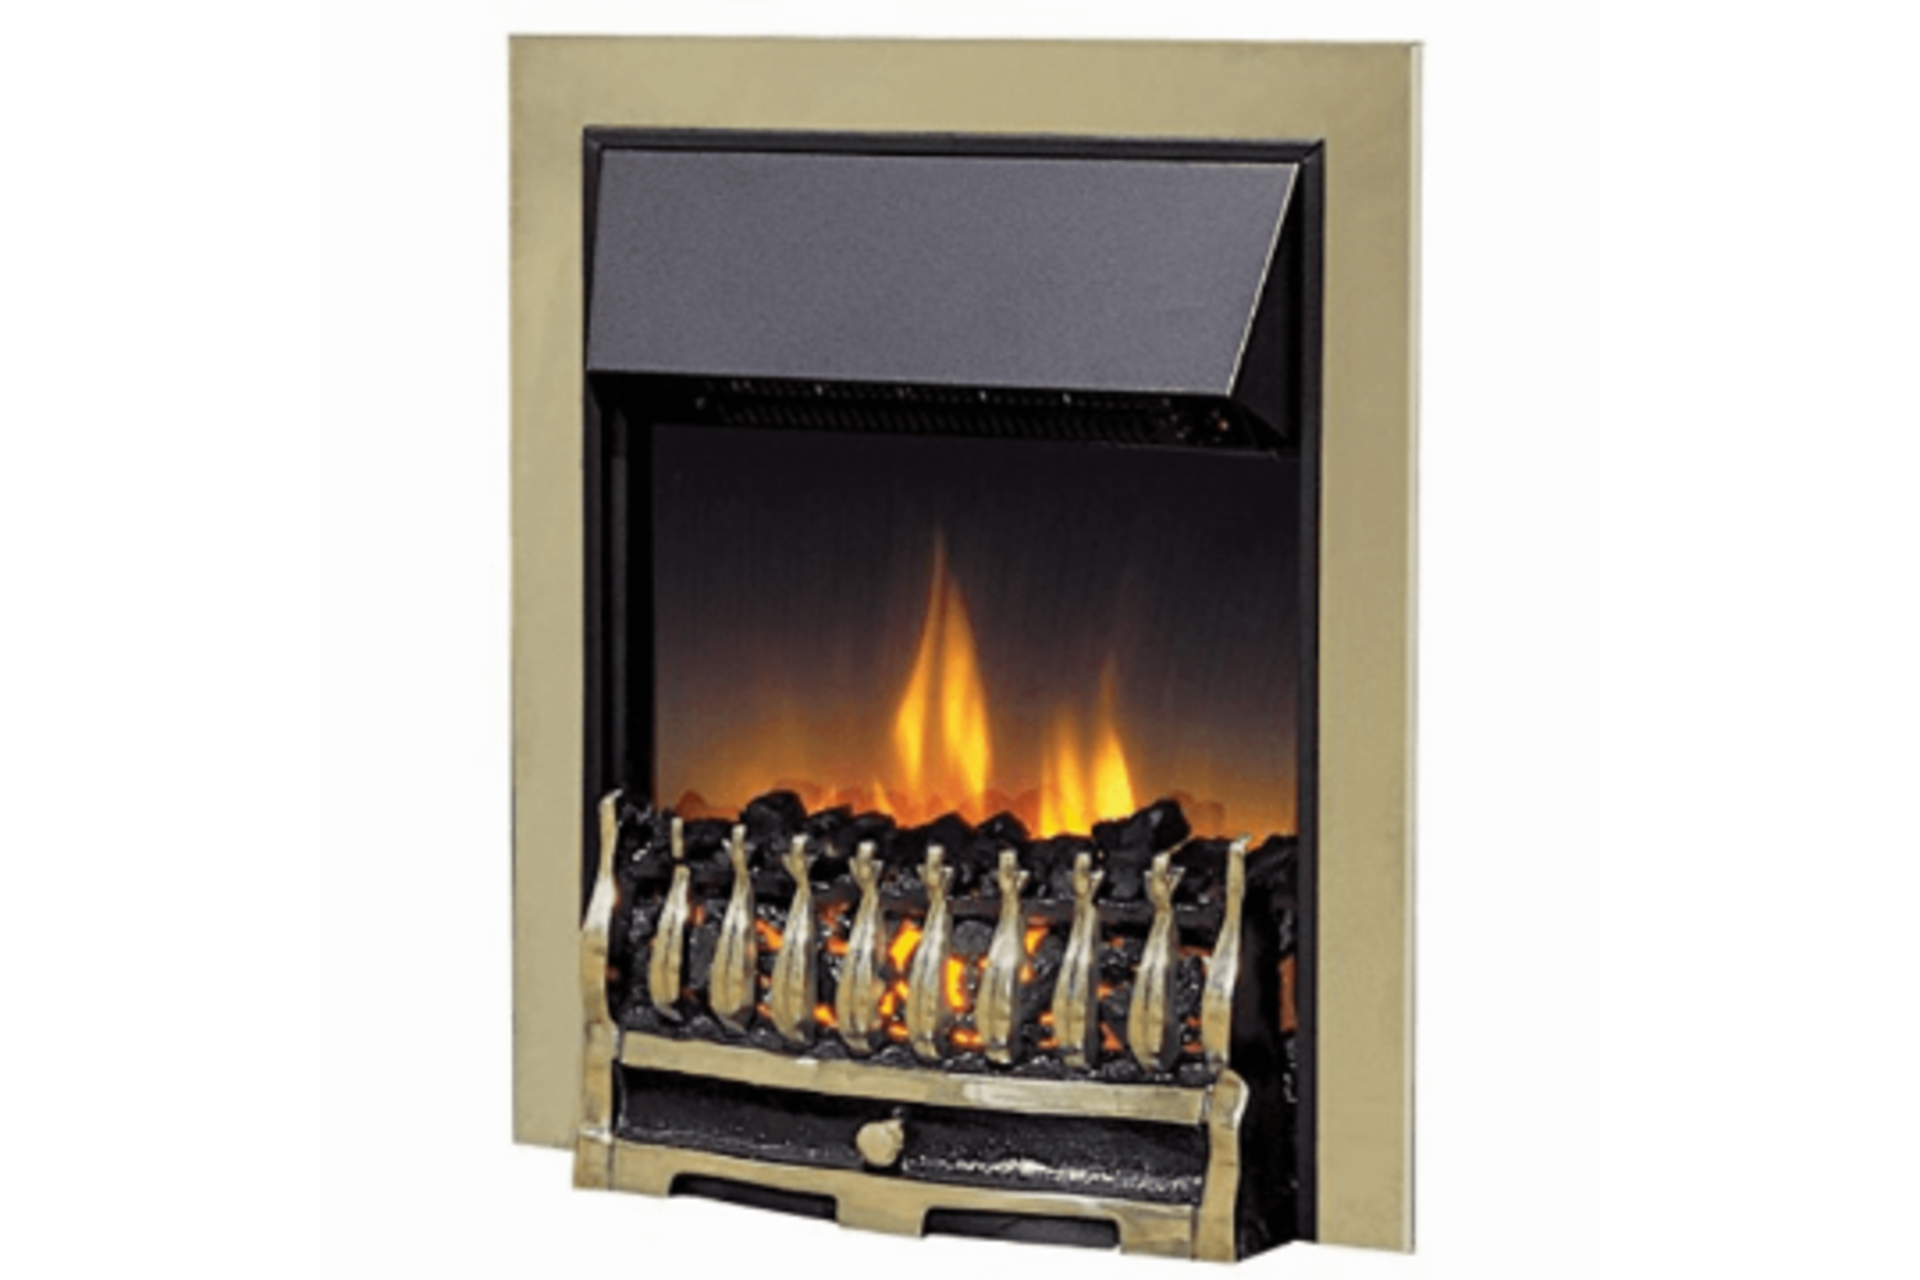 1 X BRAND NEW BOXED Dimplex Wynford Brass Optiflame Inset Electric Fire RRP £370.00. The perfect - Image 2 of 2